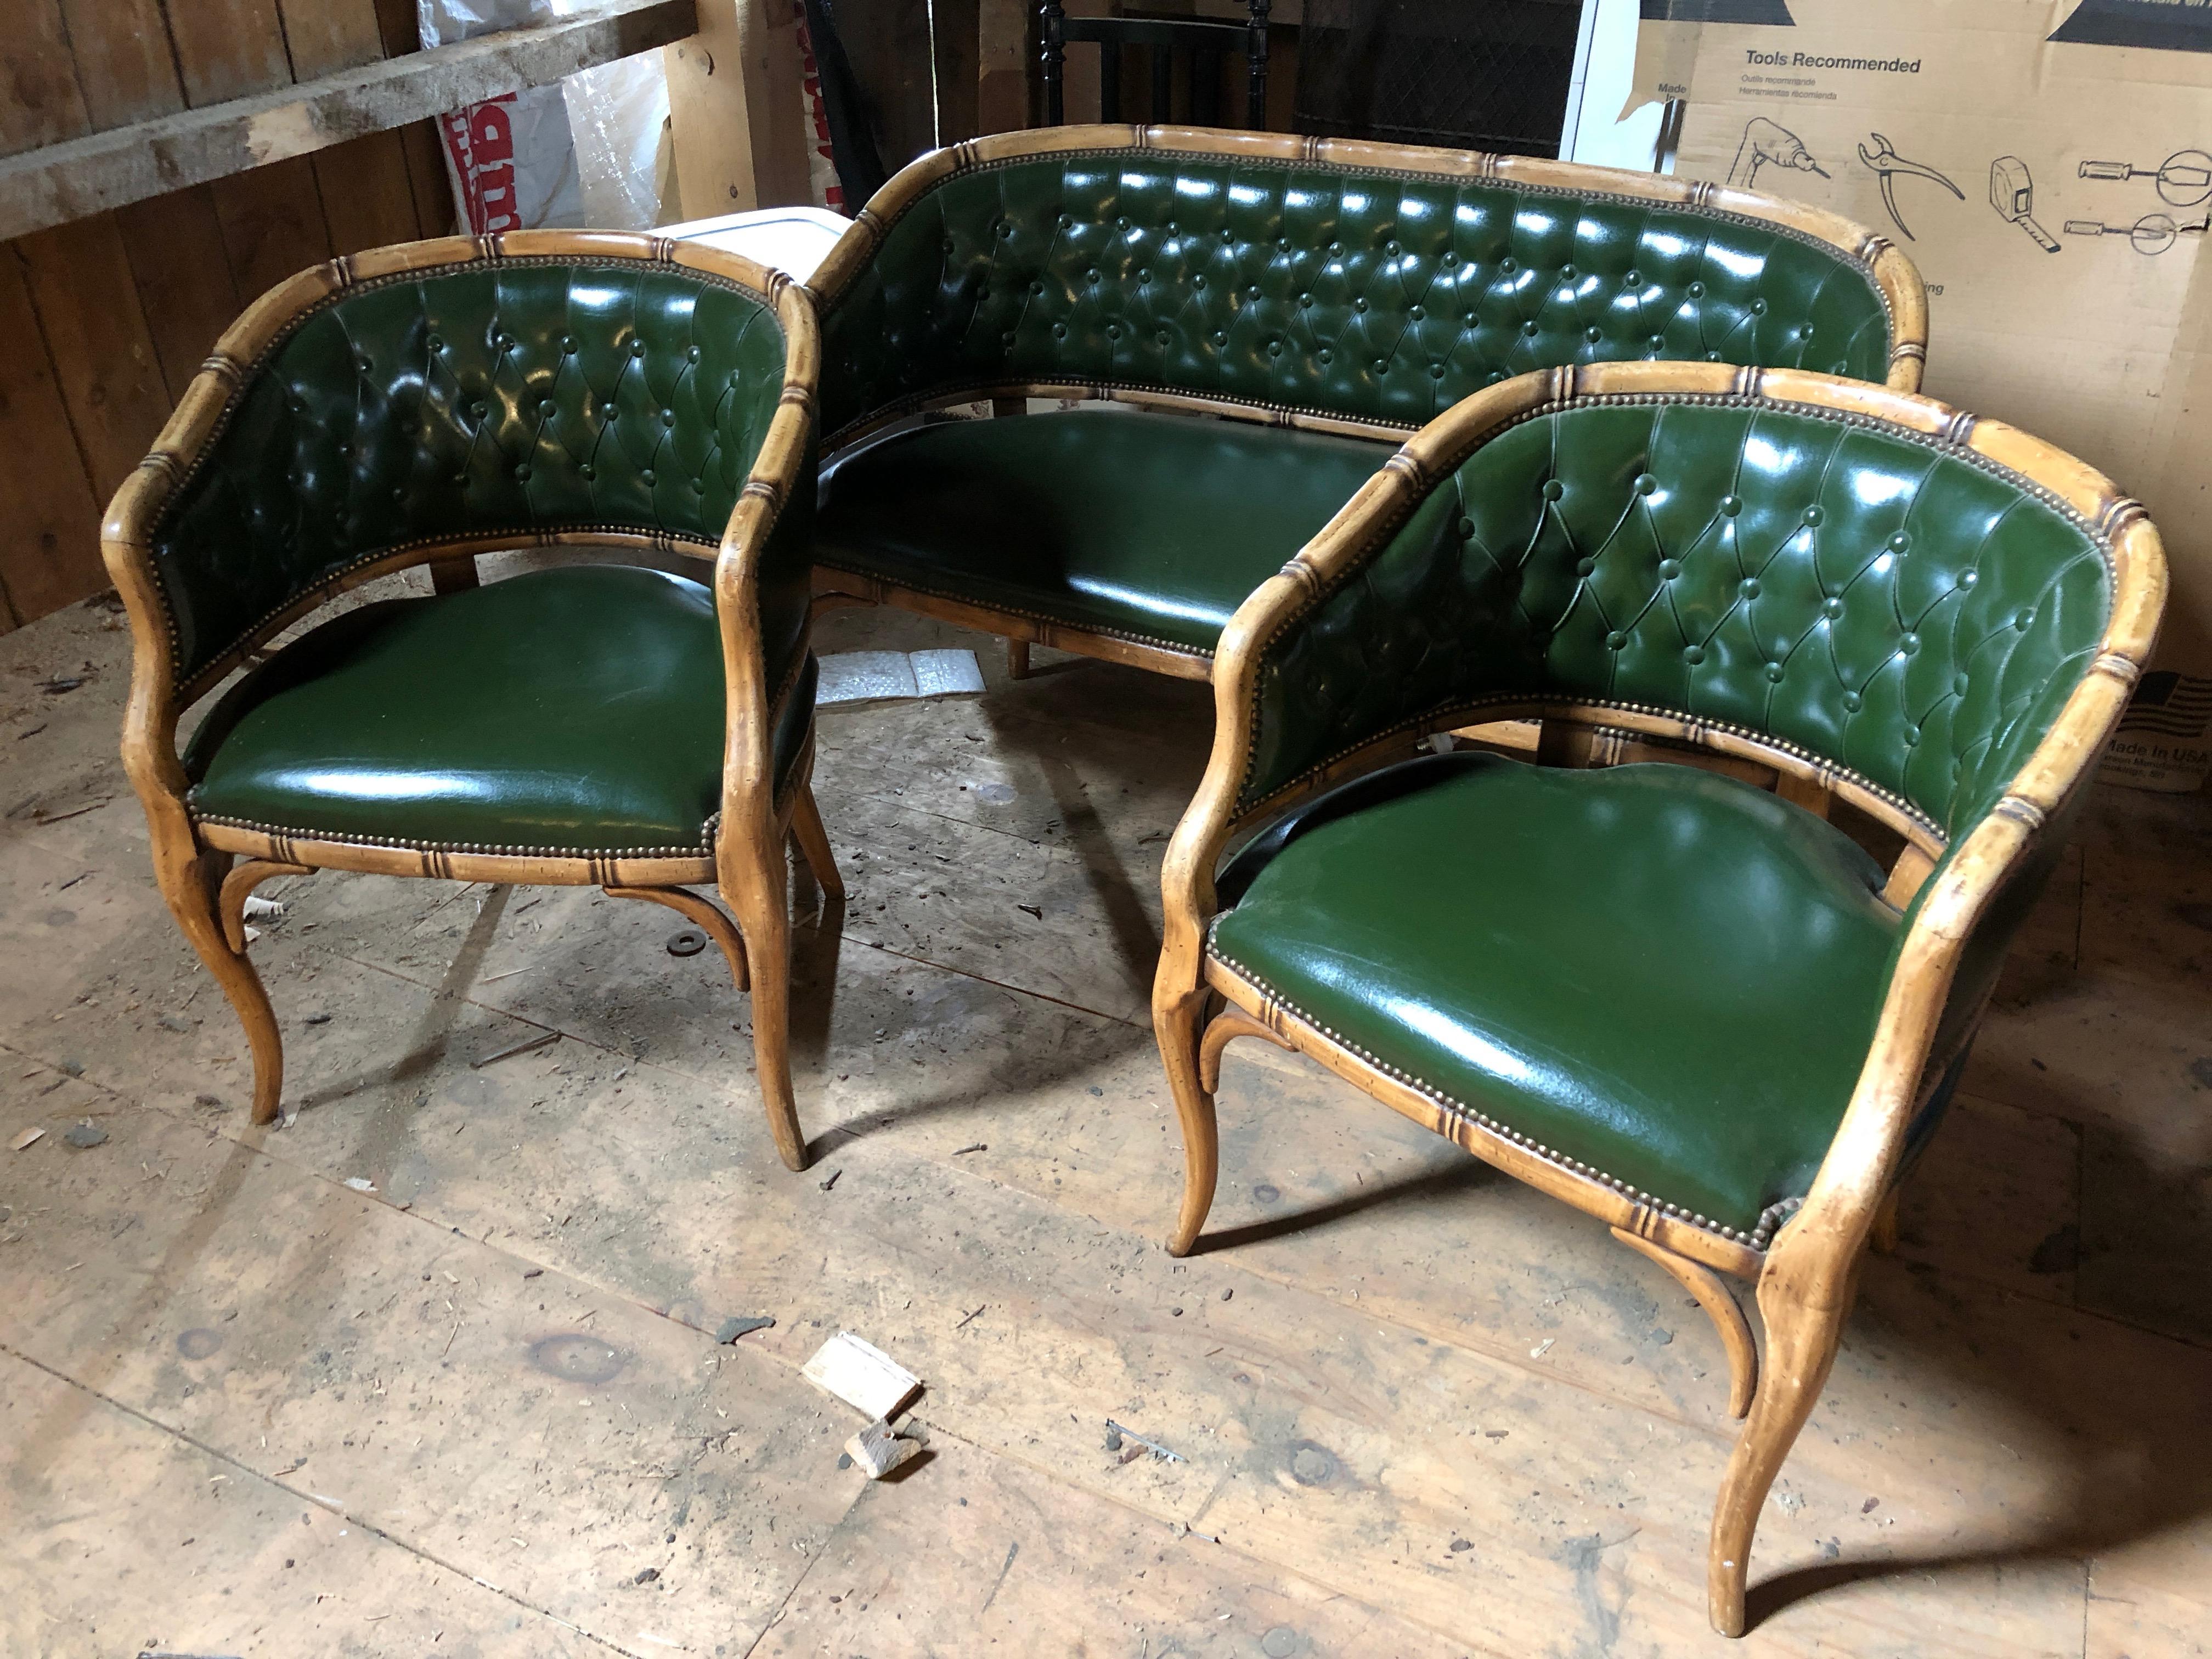 Highly decorative antique French three-piece salon suite, comprised of a sofa and a pair of armchairs/fauteuils, mid-20th century. Popular faux bamboo style and high quality original faux green leather in excellent condition in traditional forest